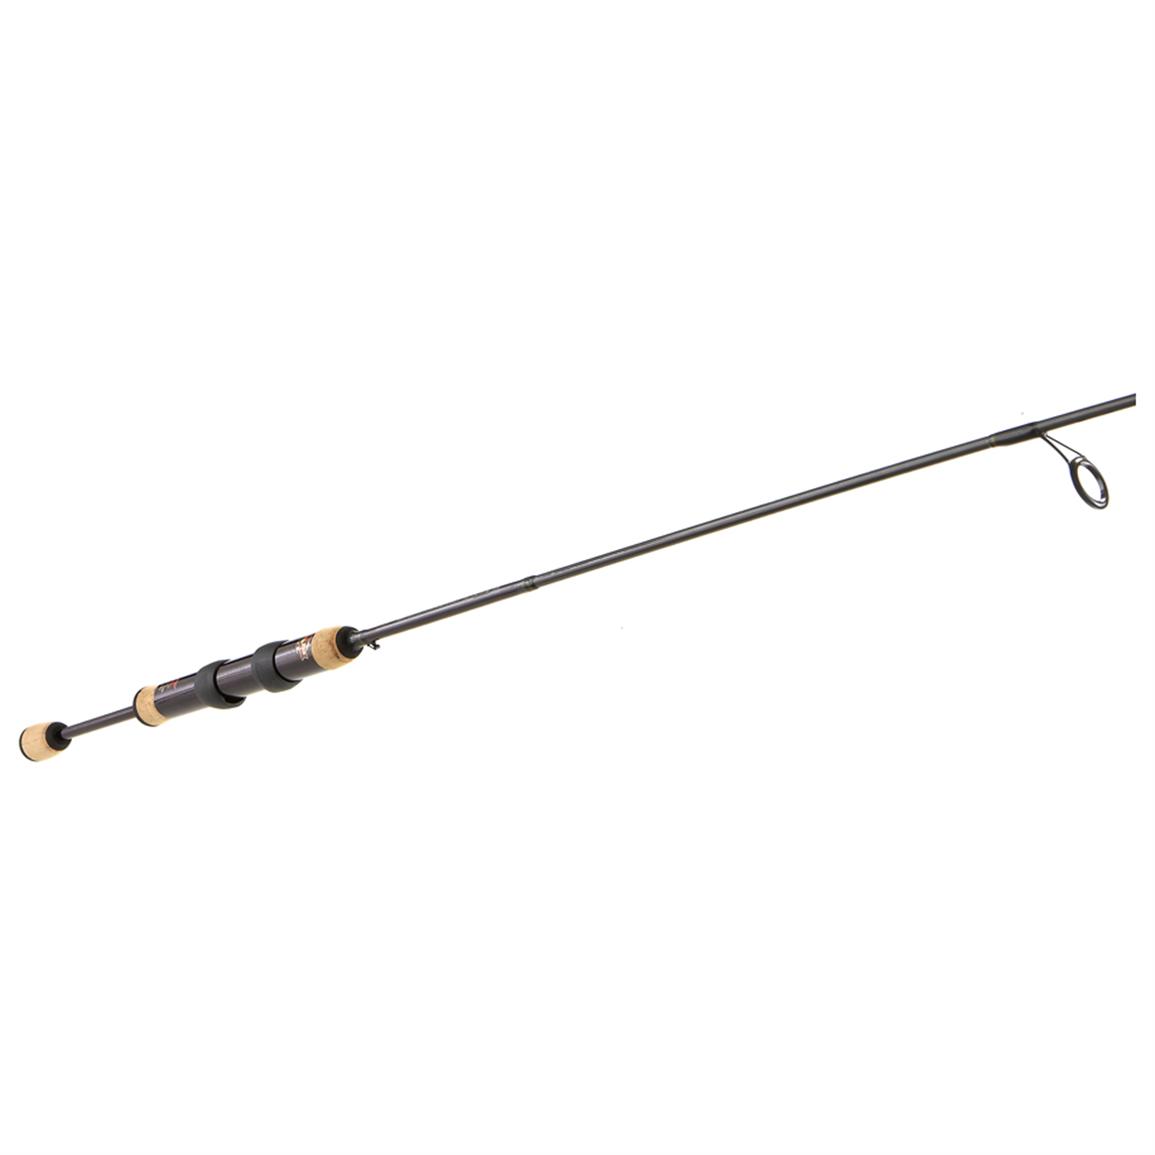 ESP Ultra Lite 6'6" Fishing Rod 186724, Spinning Rods at